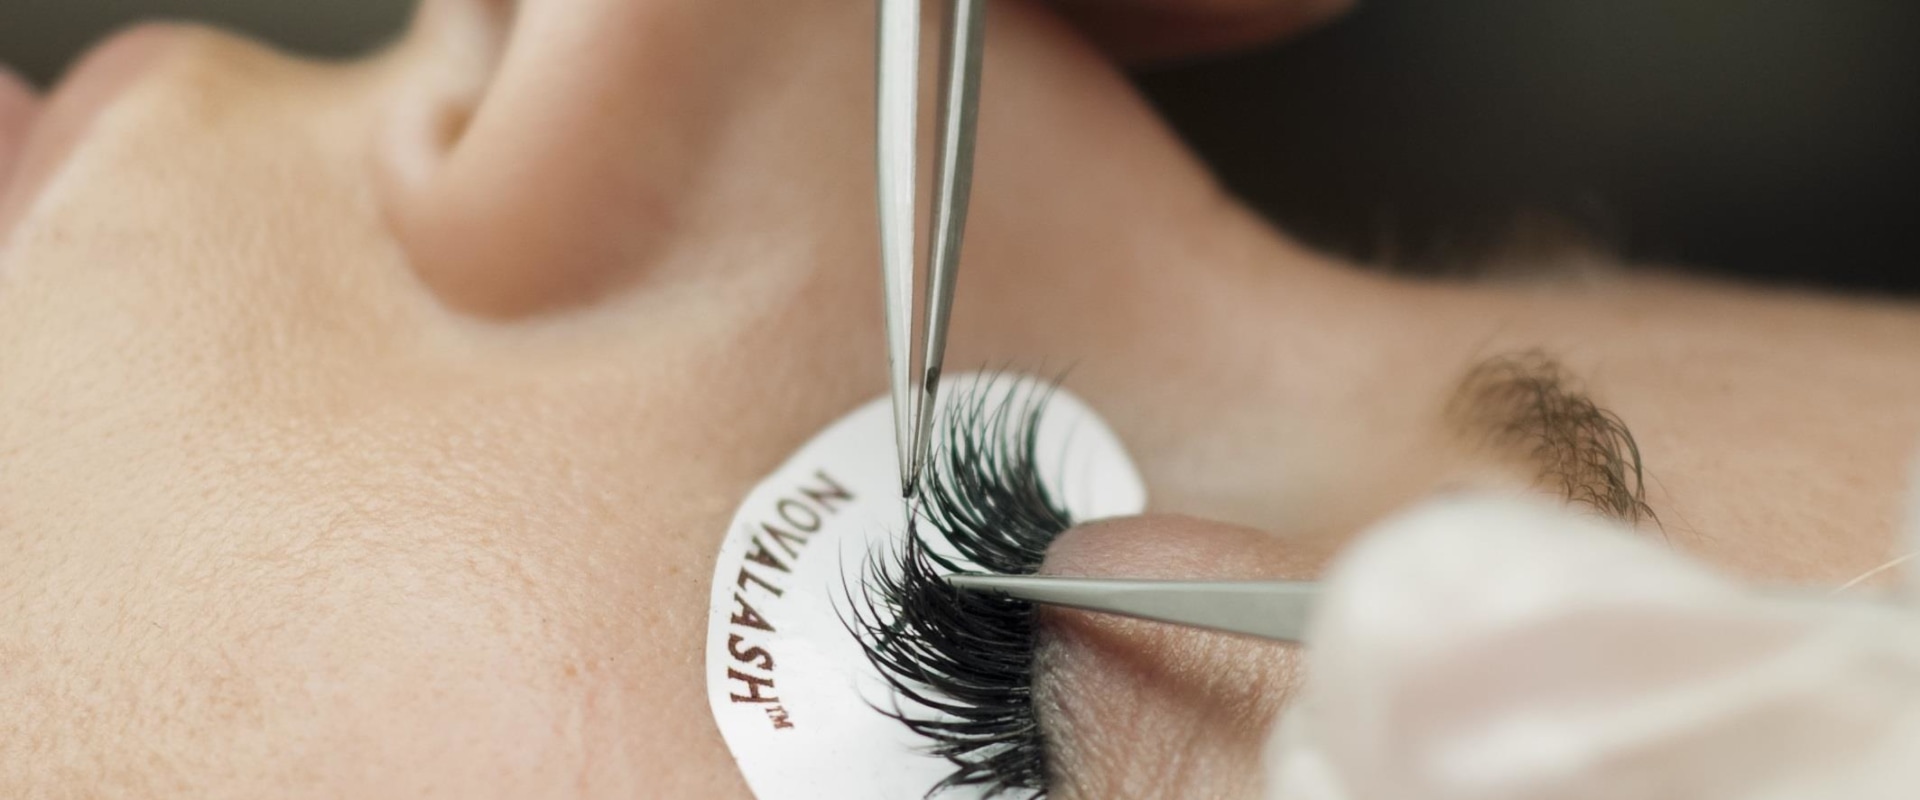 Is becoming a lash tech worth it?